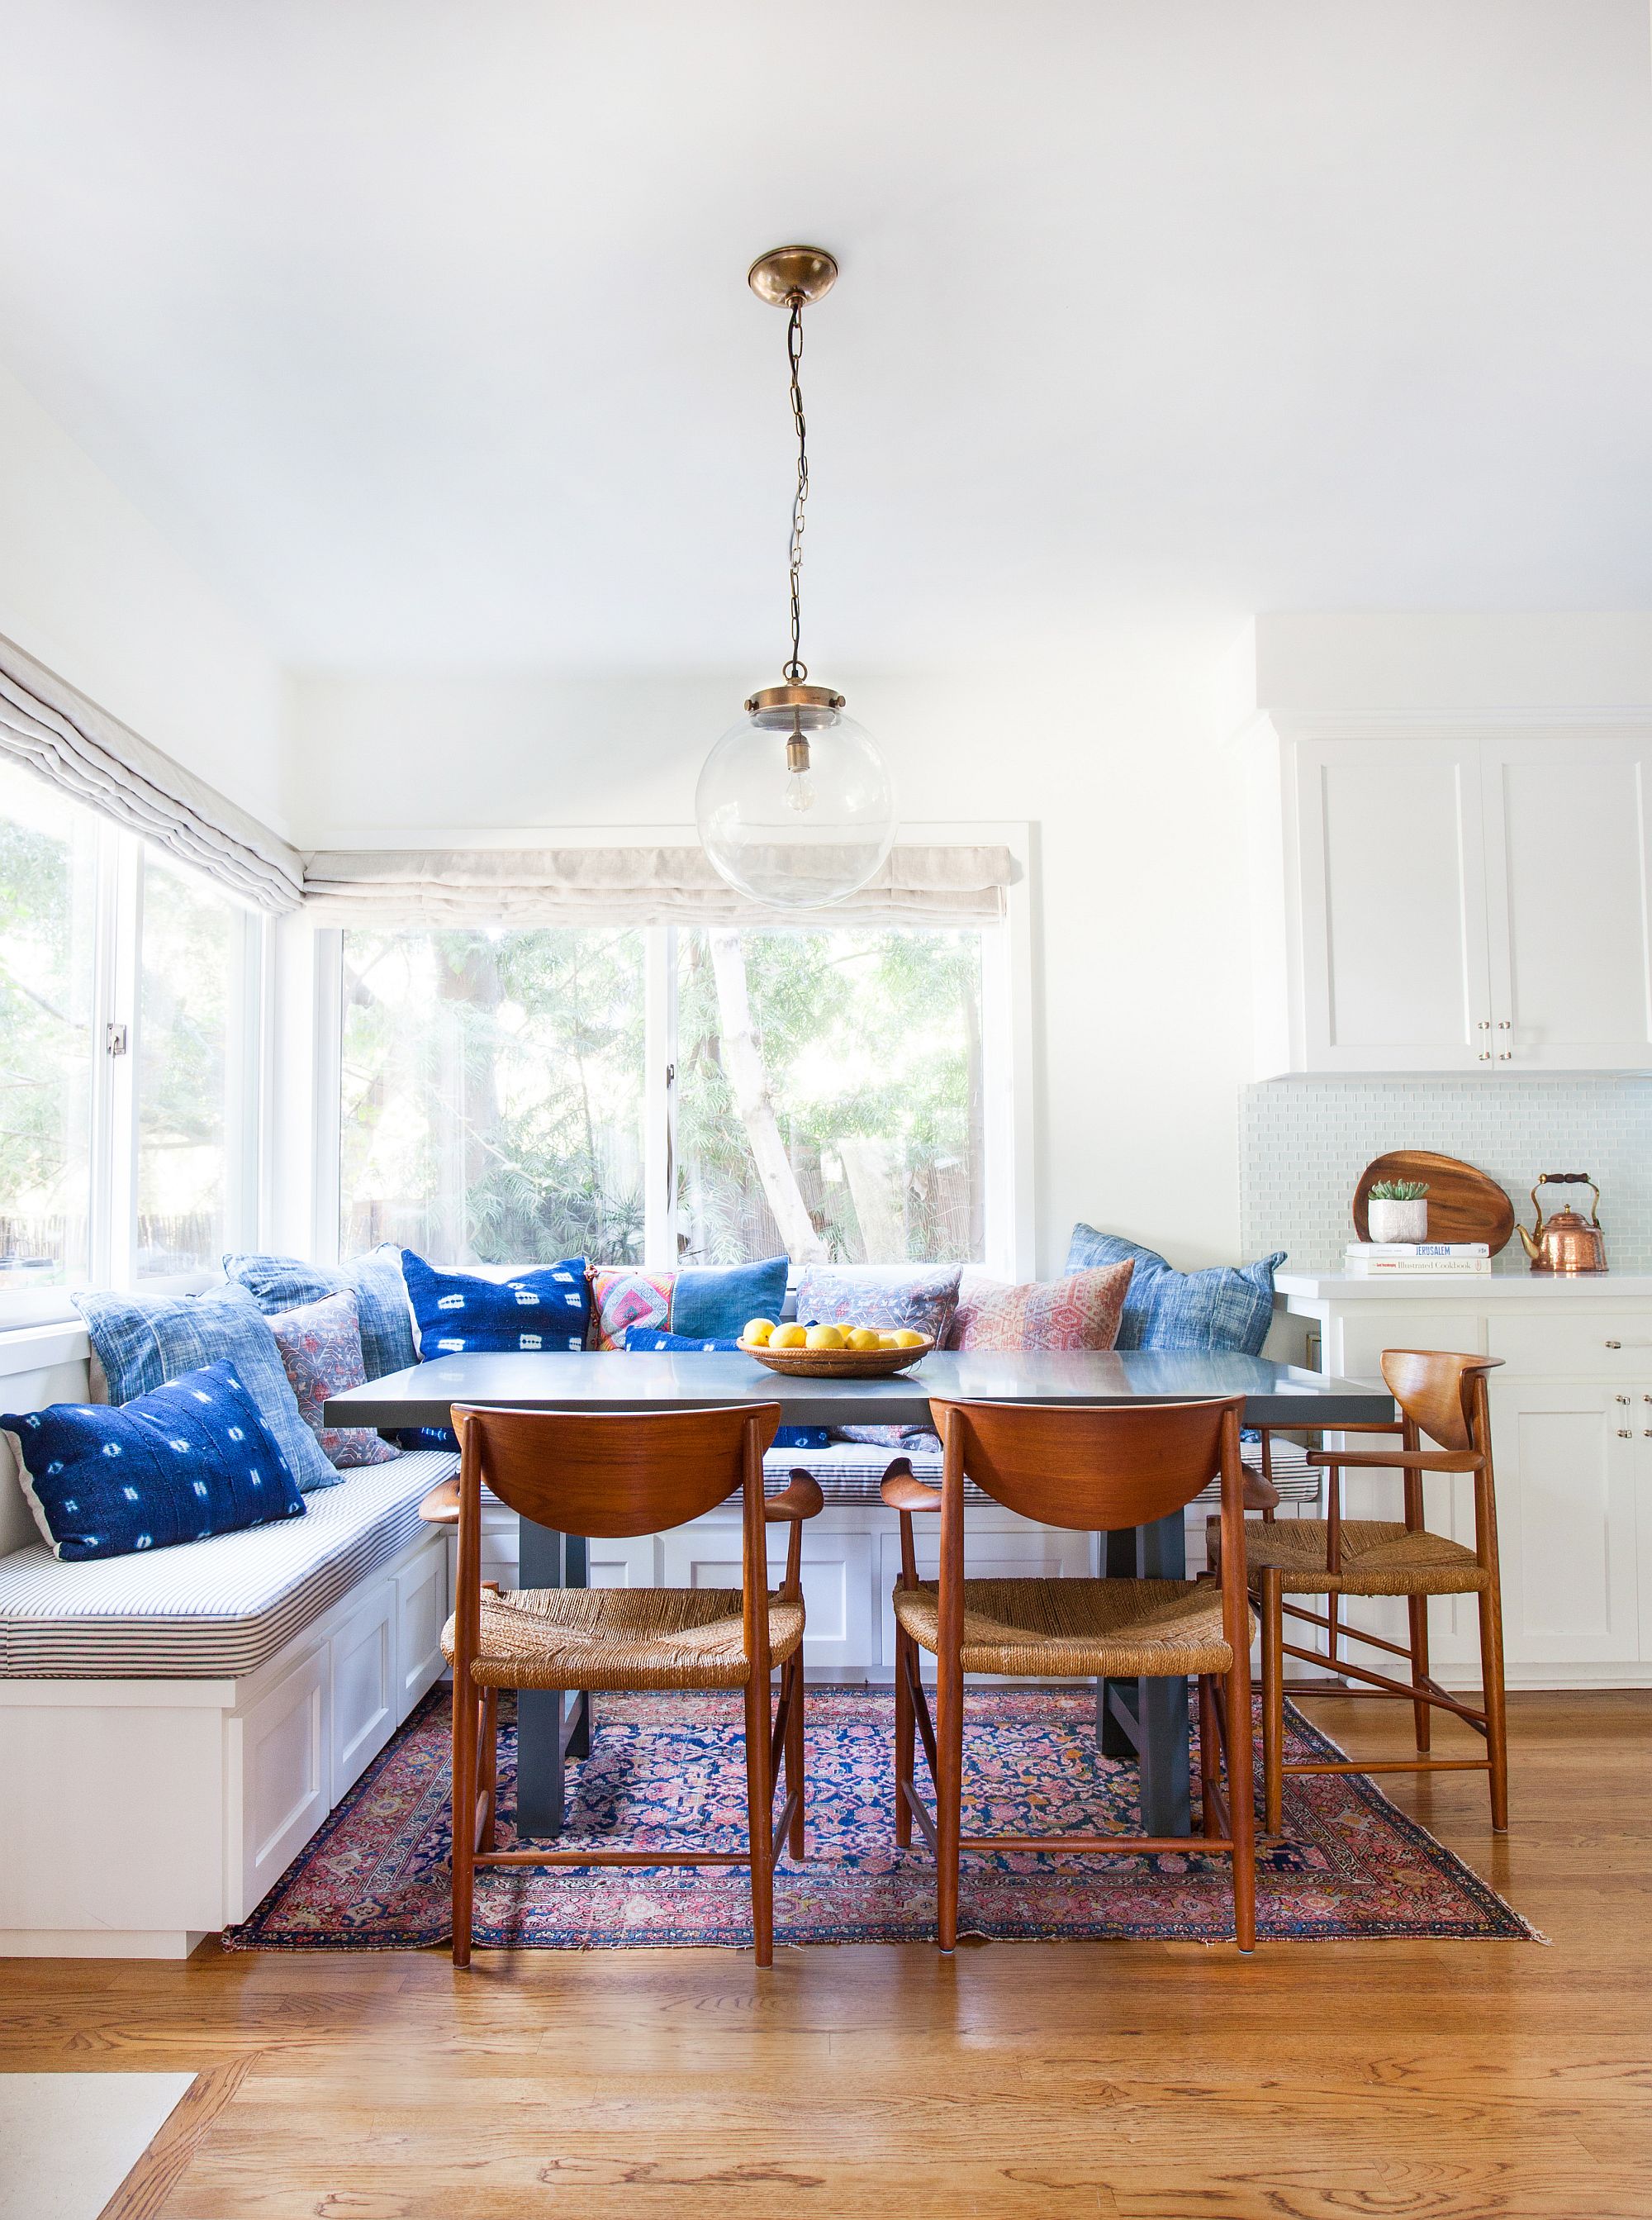 Banquette-that-fits-a-family-big-in-size